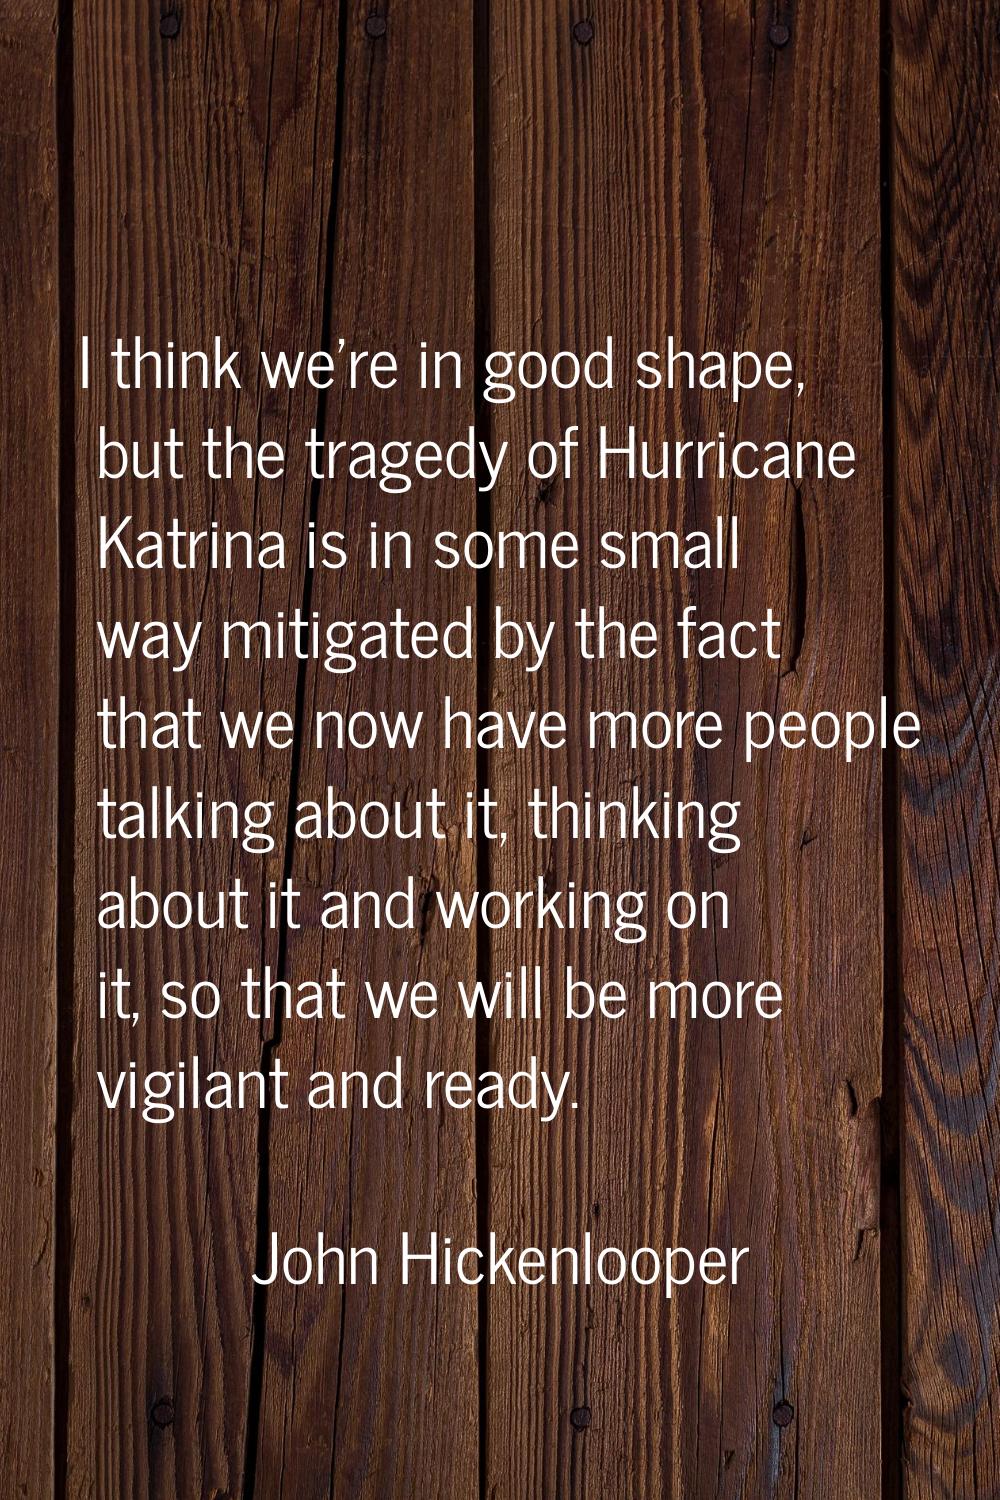 I think we're in good shape, but the tragedy of Hurricane Katrina is in some small way mitigated by